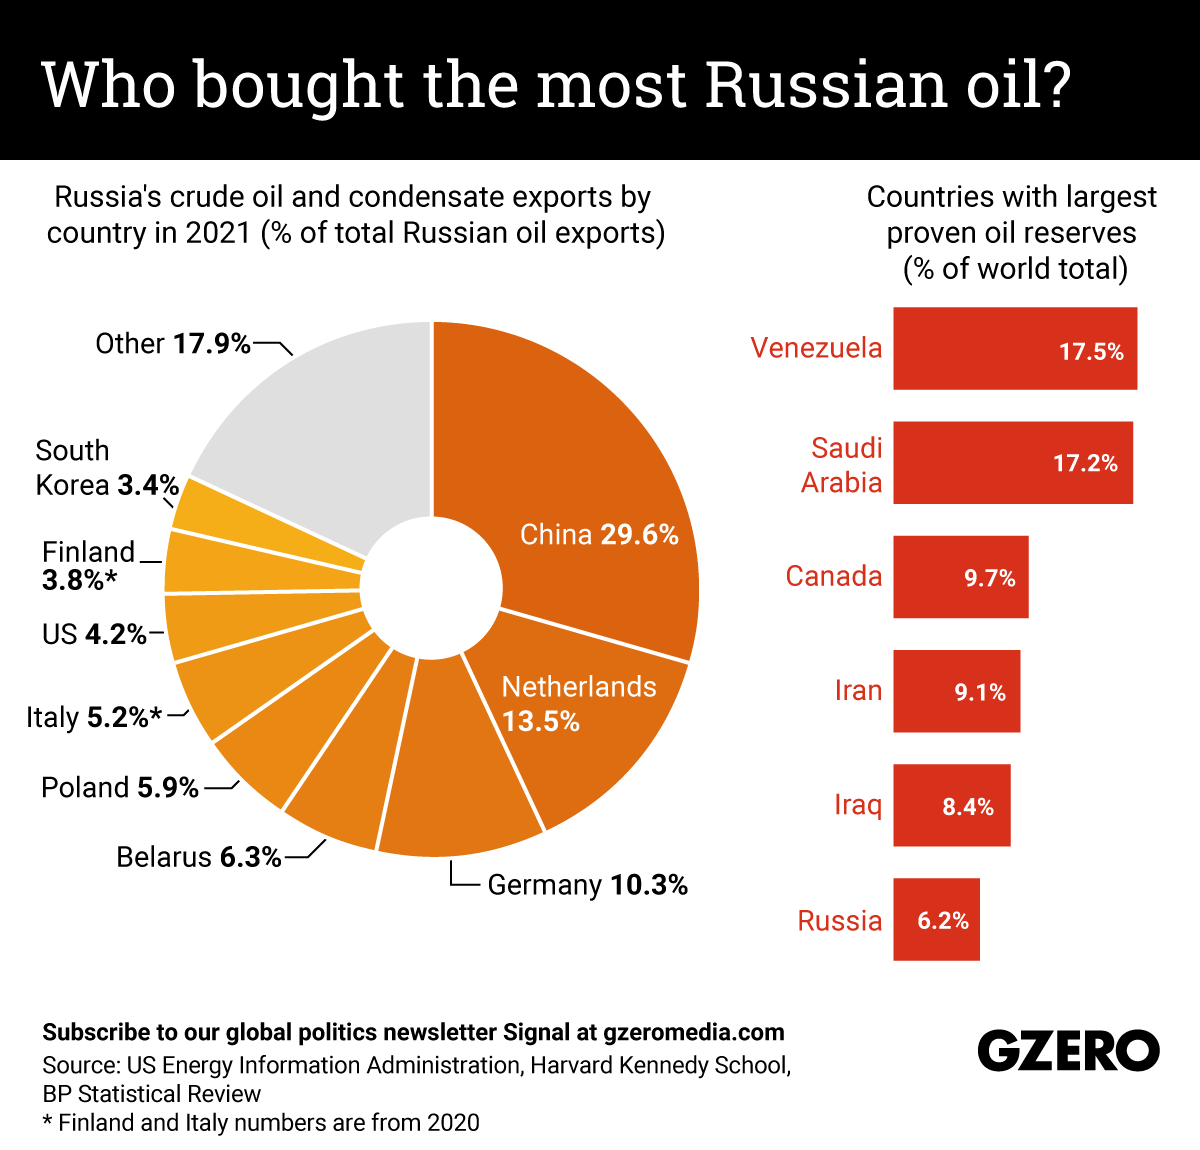 The Graphic Truth: Who bought the most Russian oil?